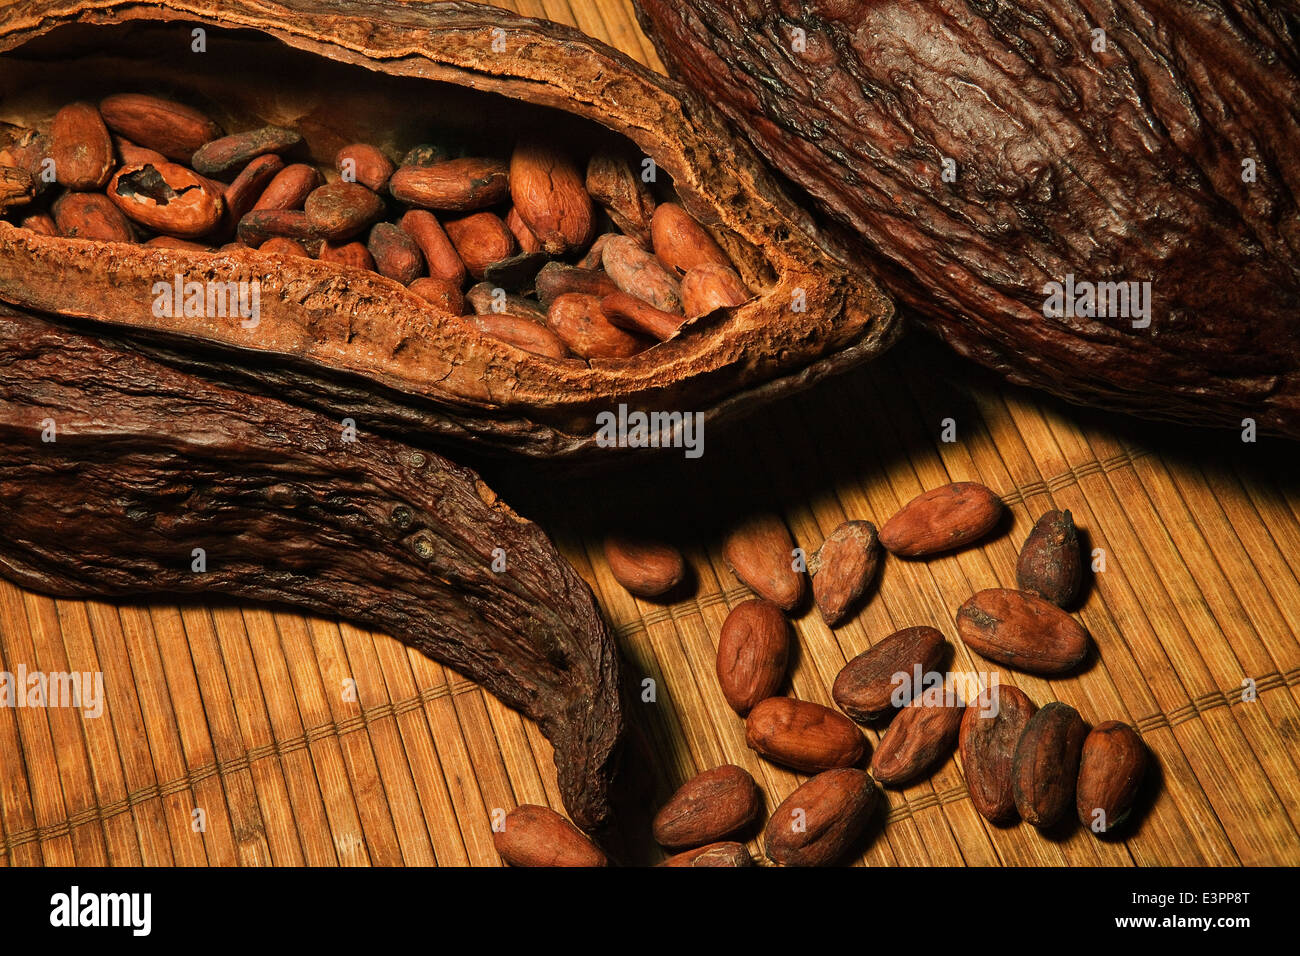 Cocoa beans nut husks with chocolate beans inside Theobroma fruit. Stock Photo